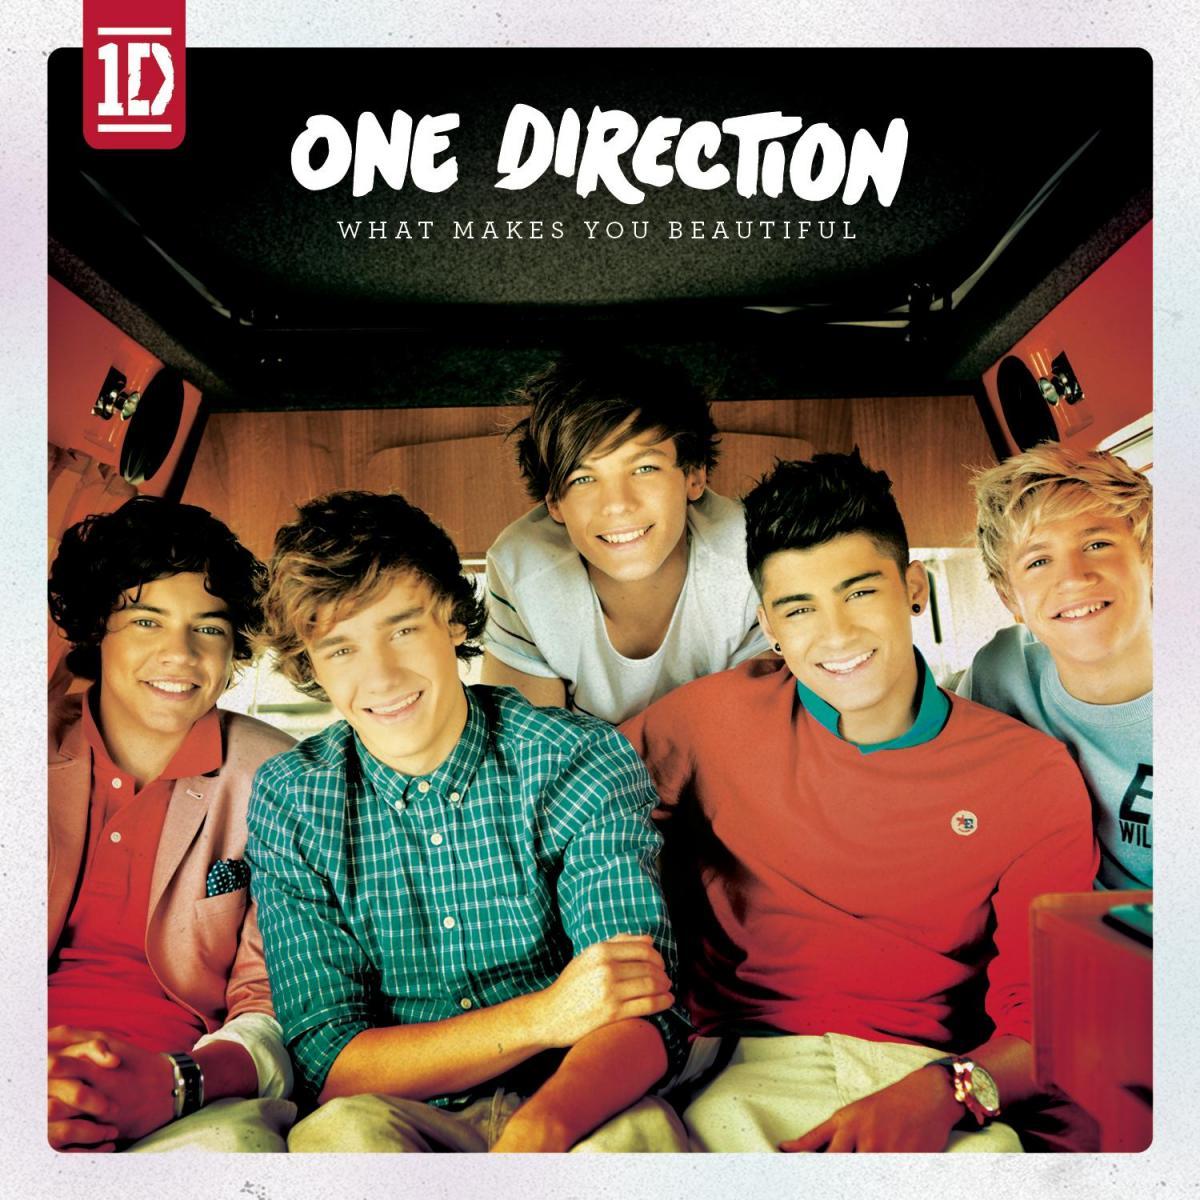 One Direction: What Makes You Beautiful (Music Video)